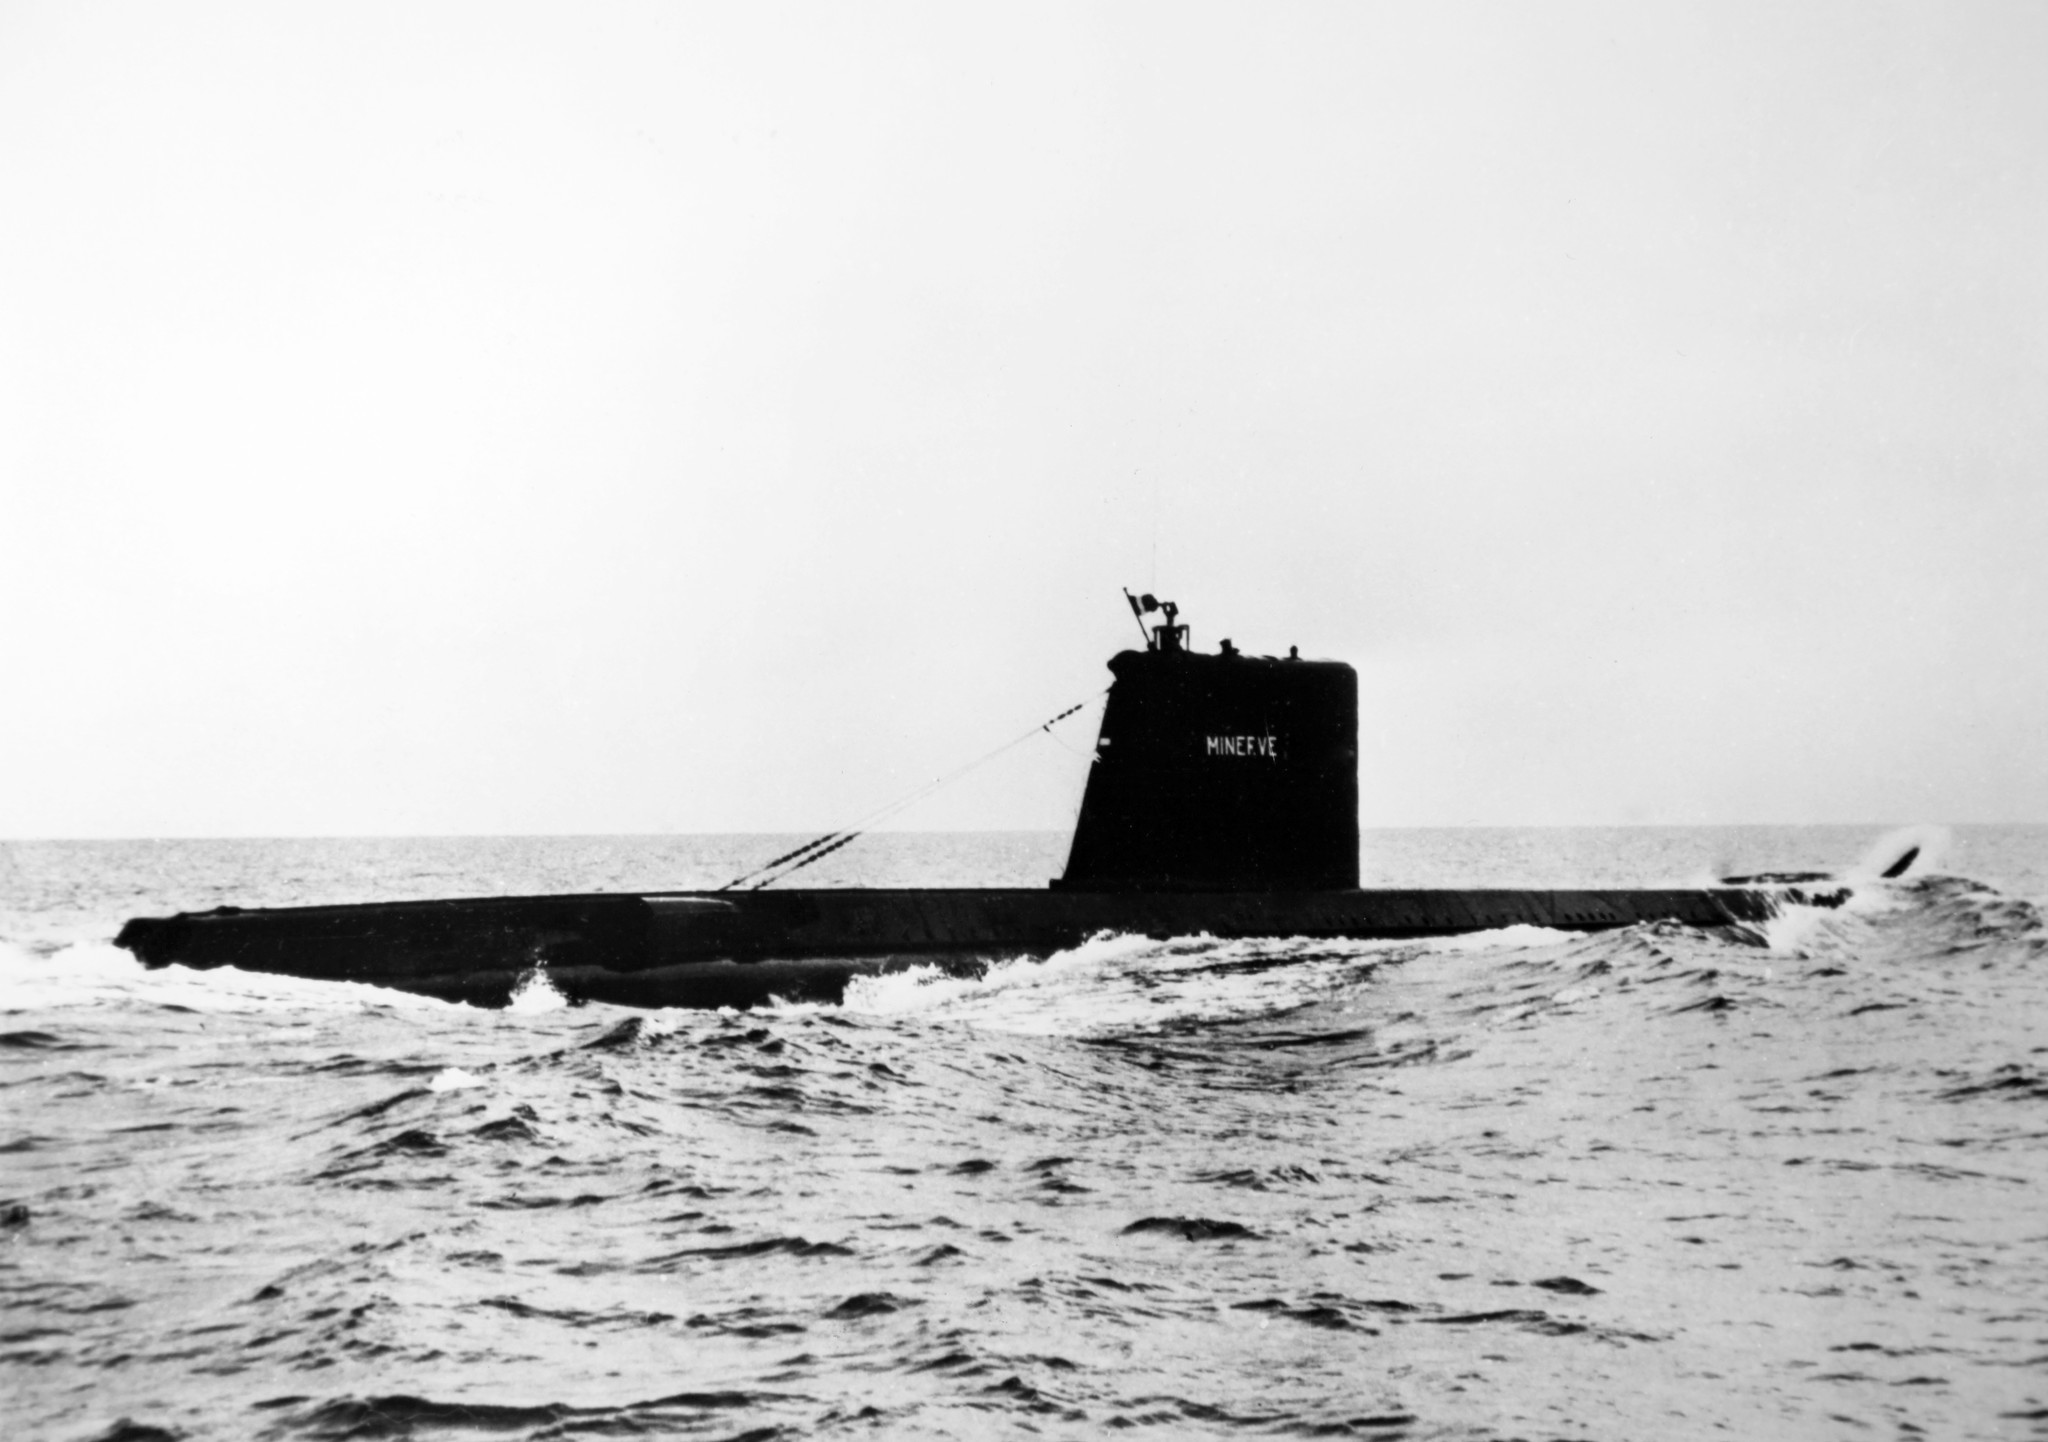 French submarine 'Minerve’ found more than 50 years after mysterious disappearance